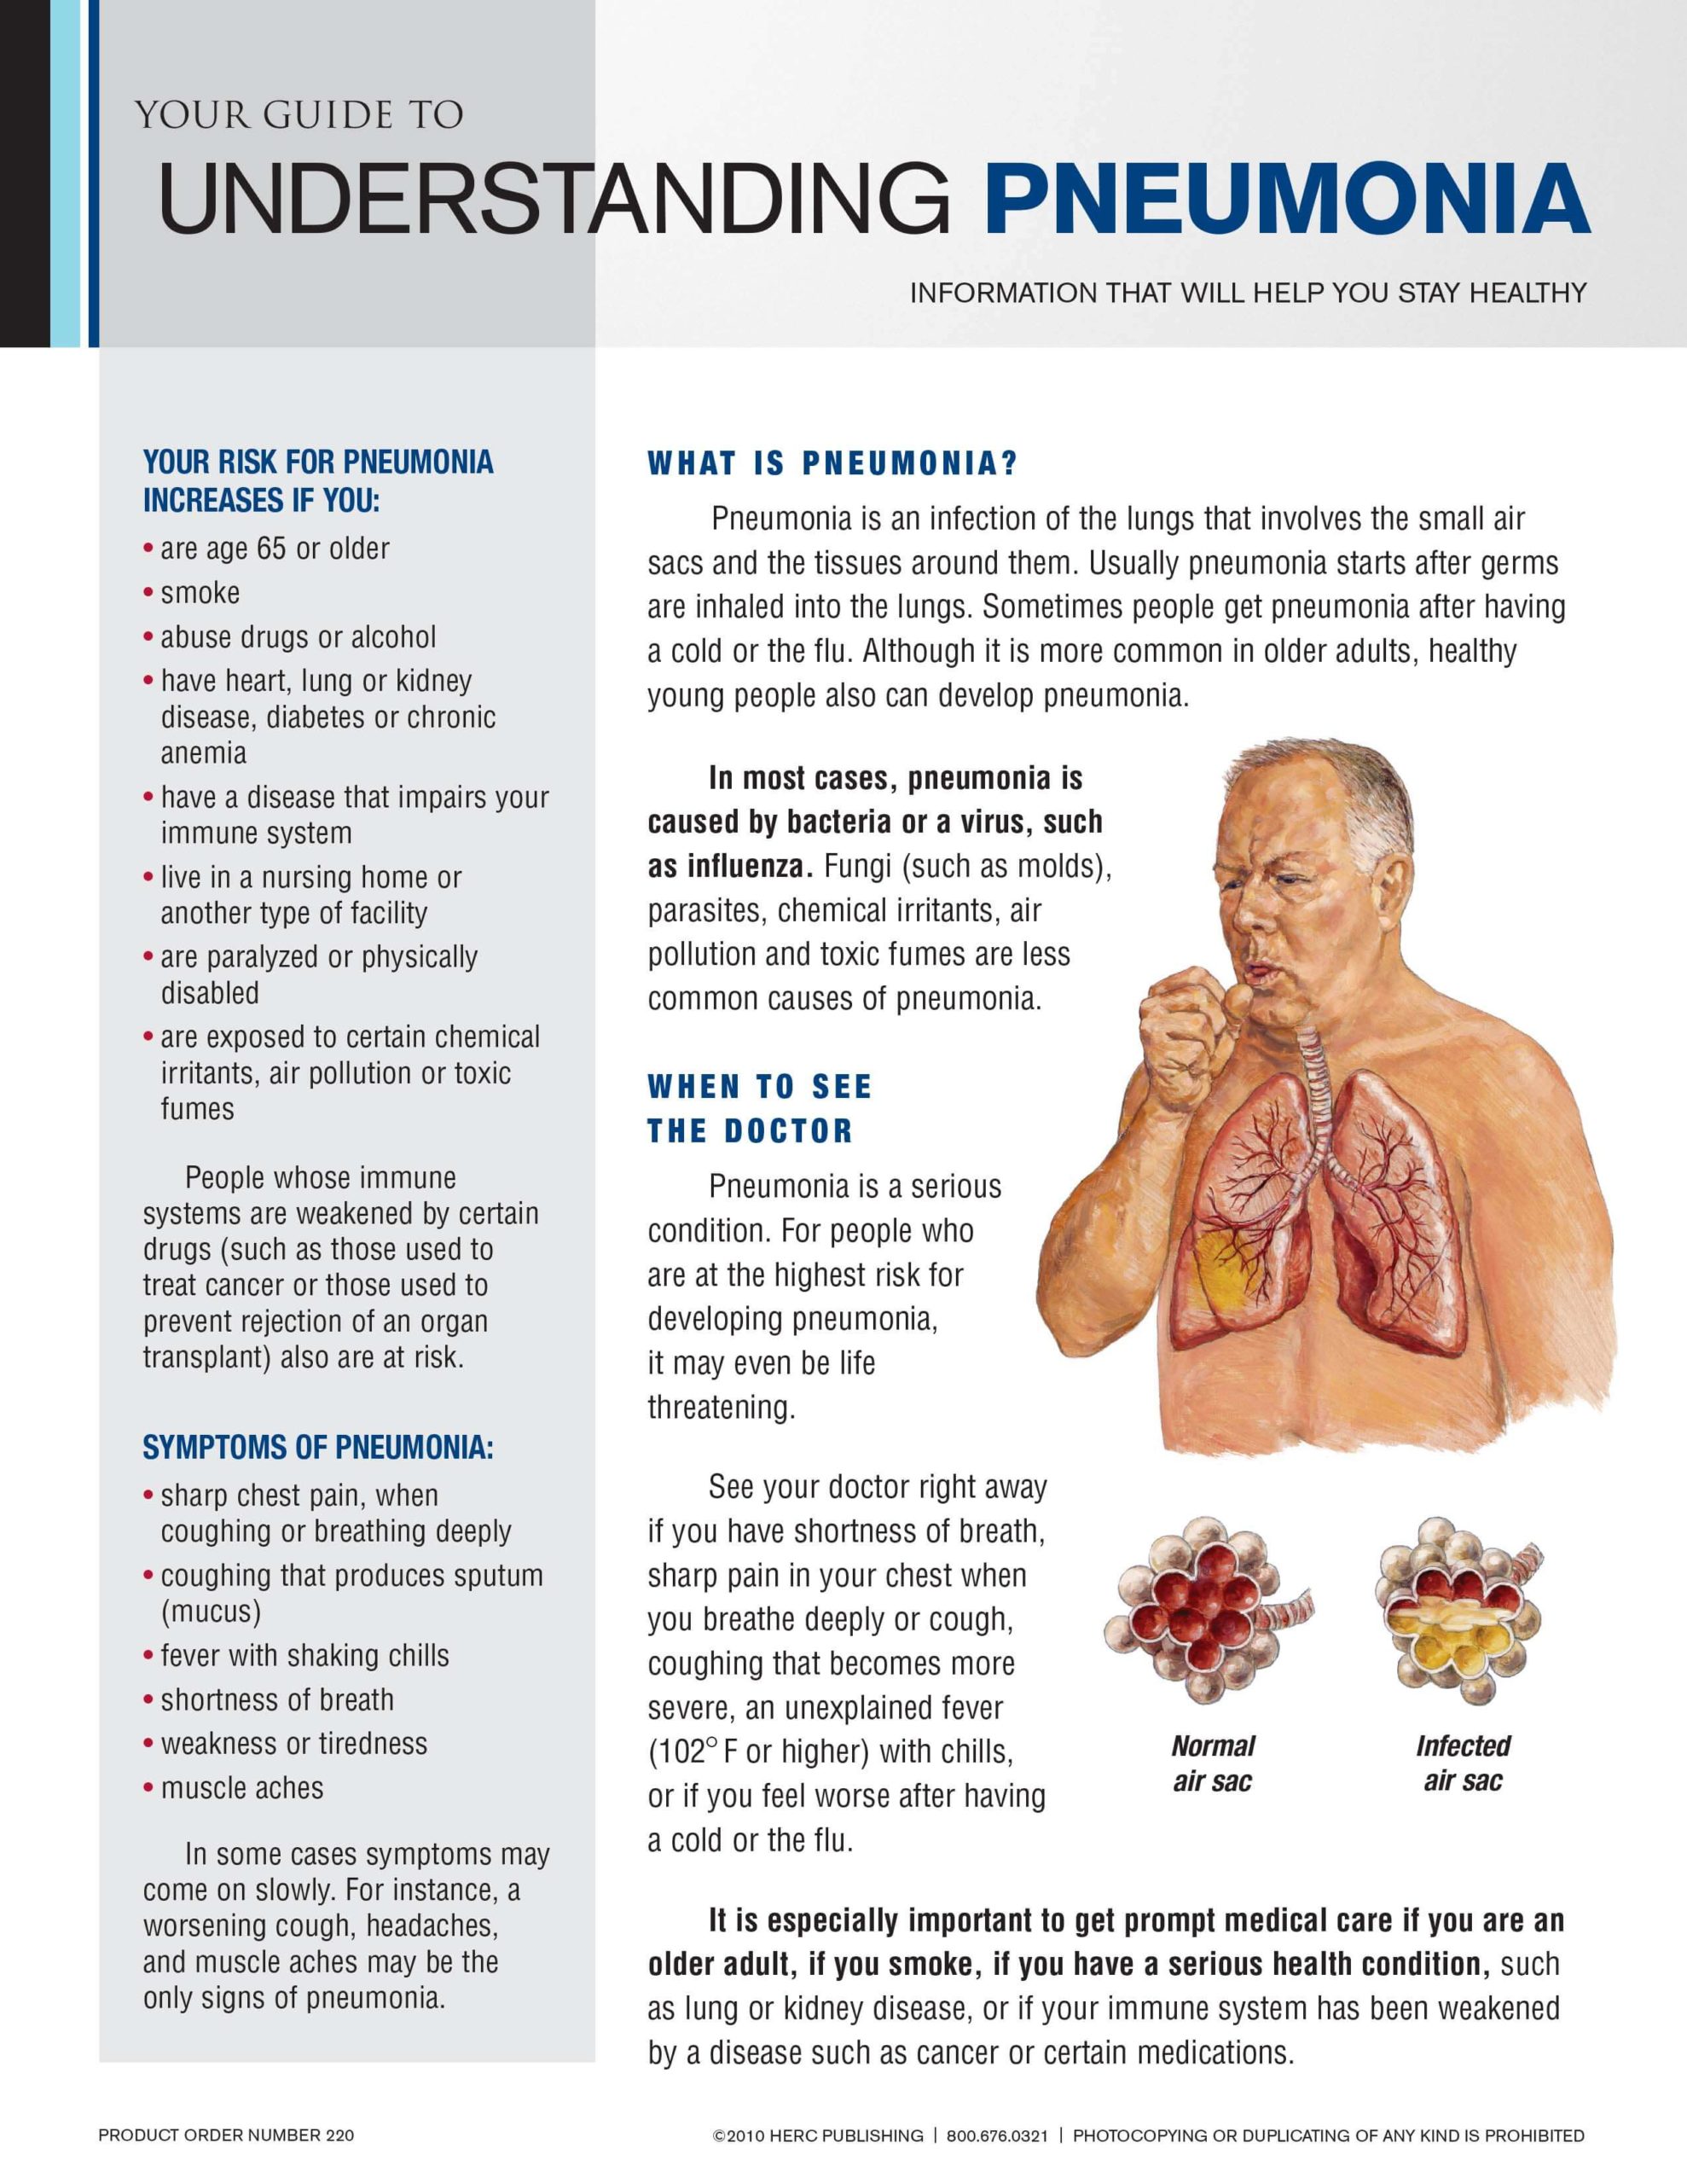 research articles on pneumonia